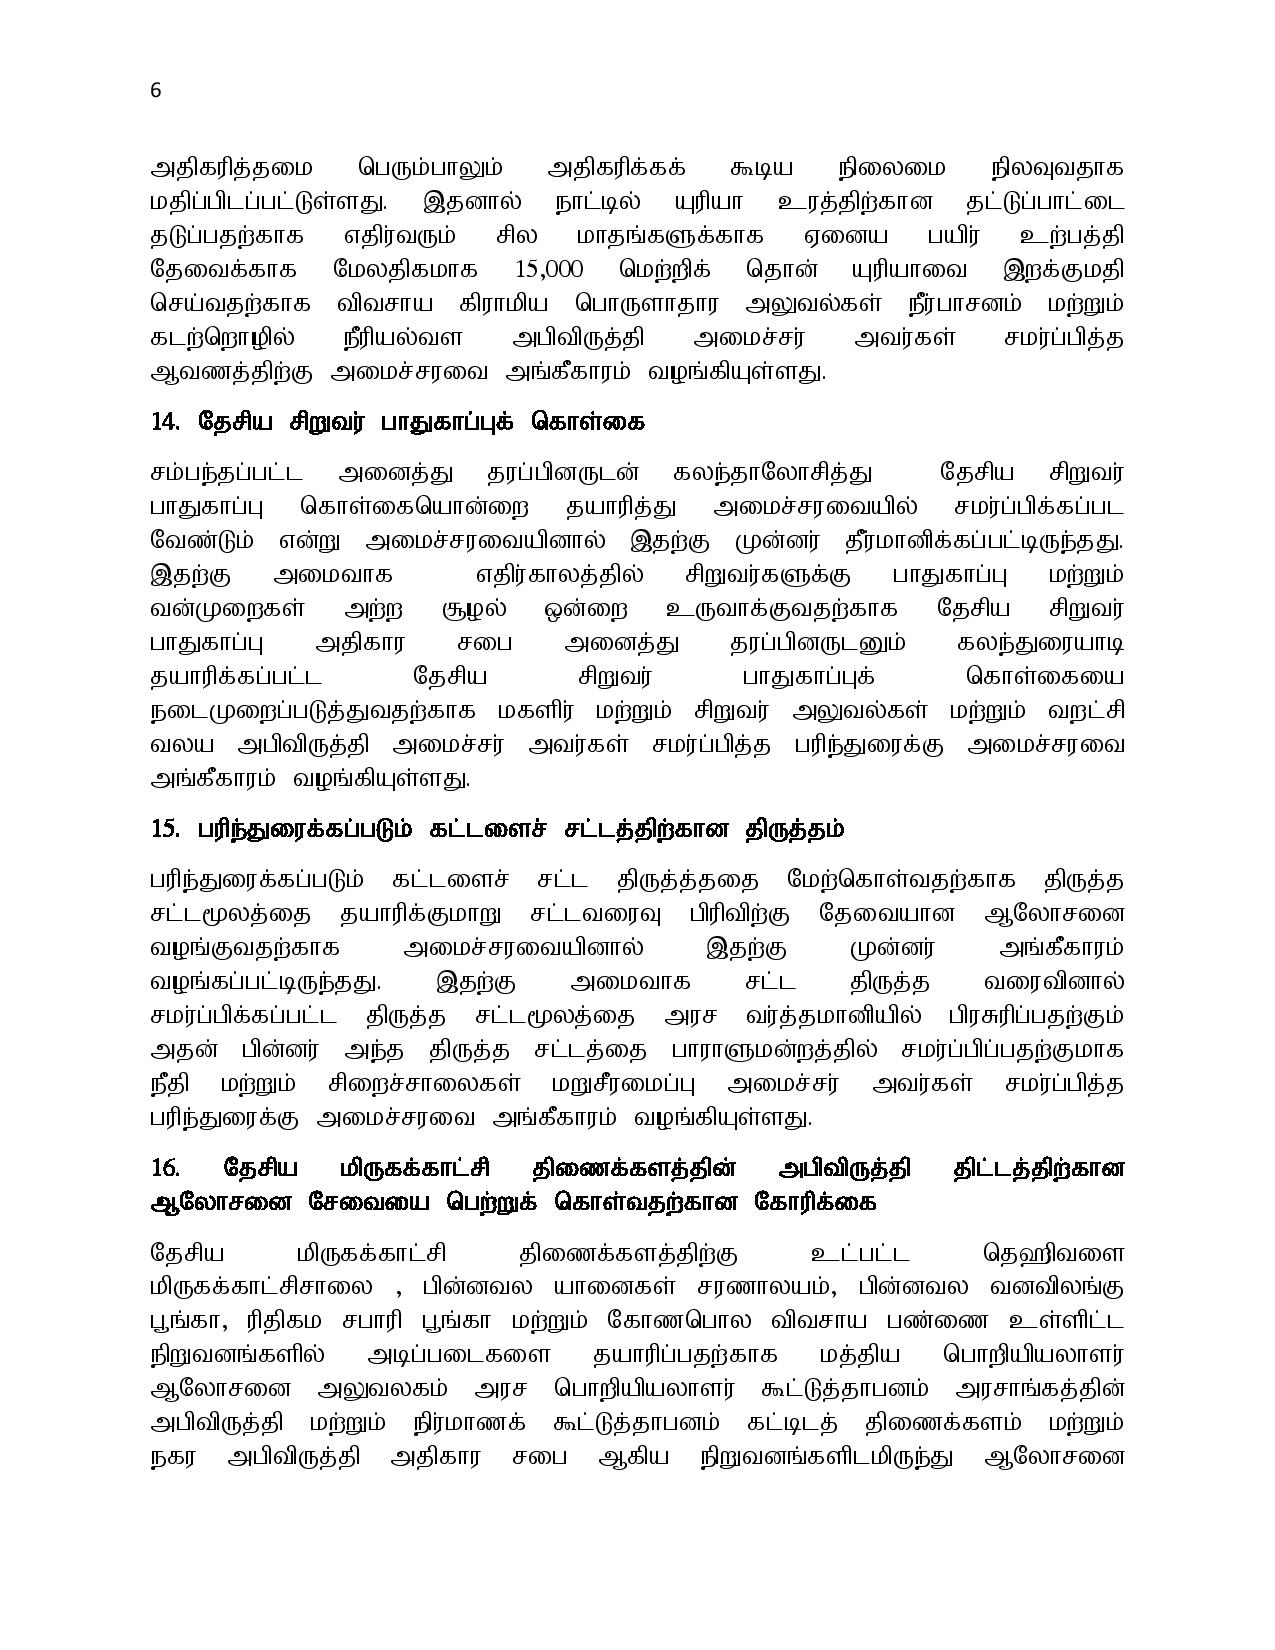 29.10.2019 cabinet tamil page 006